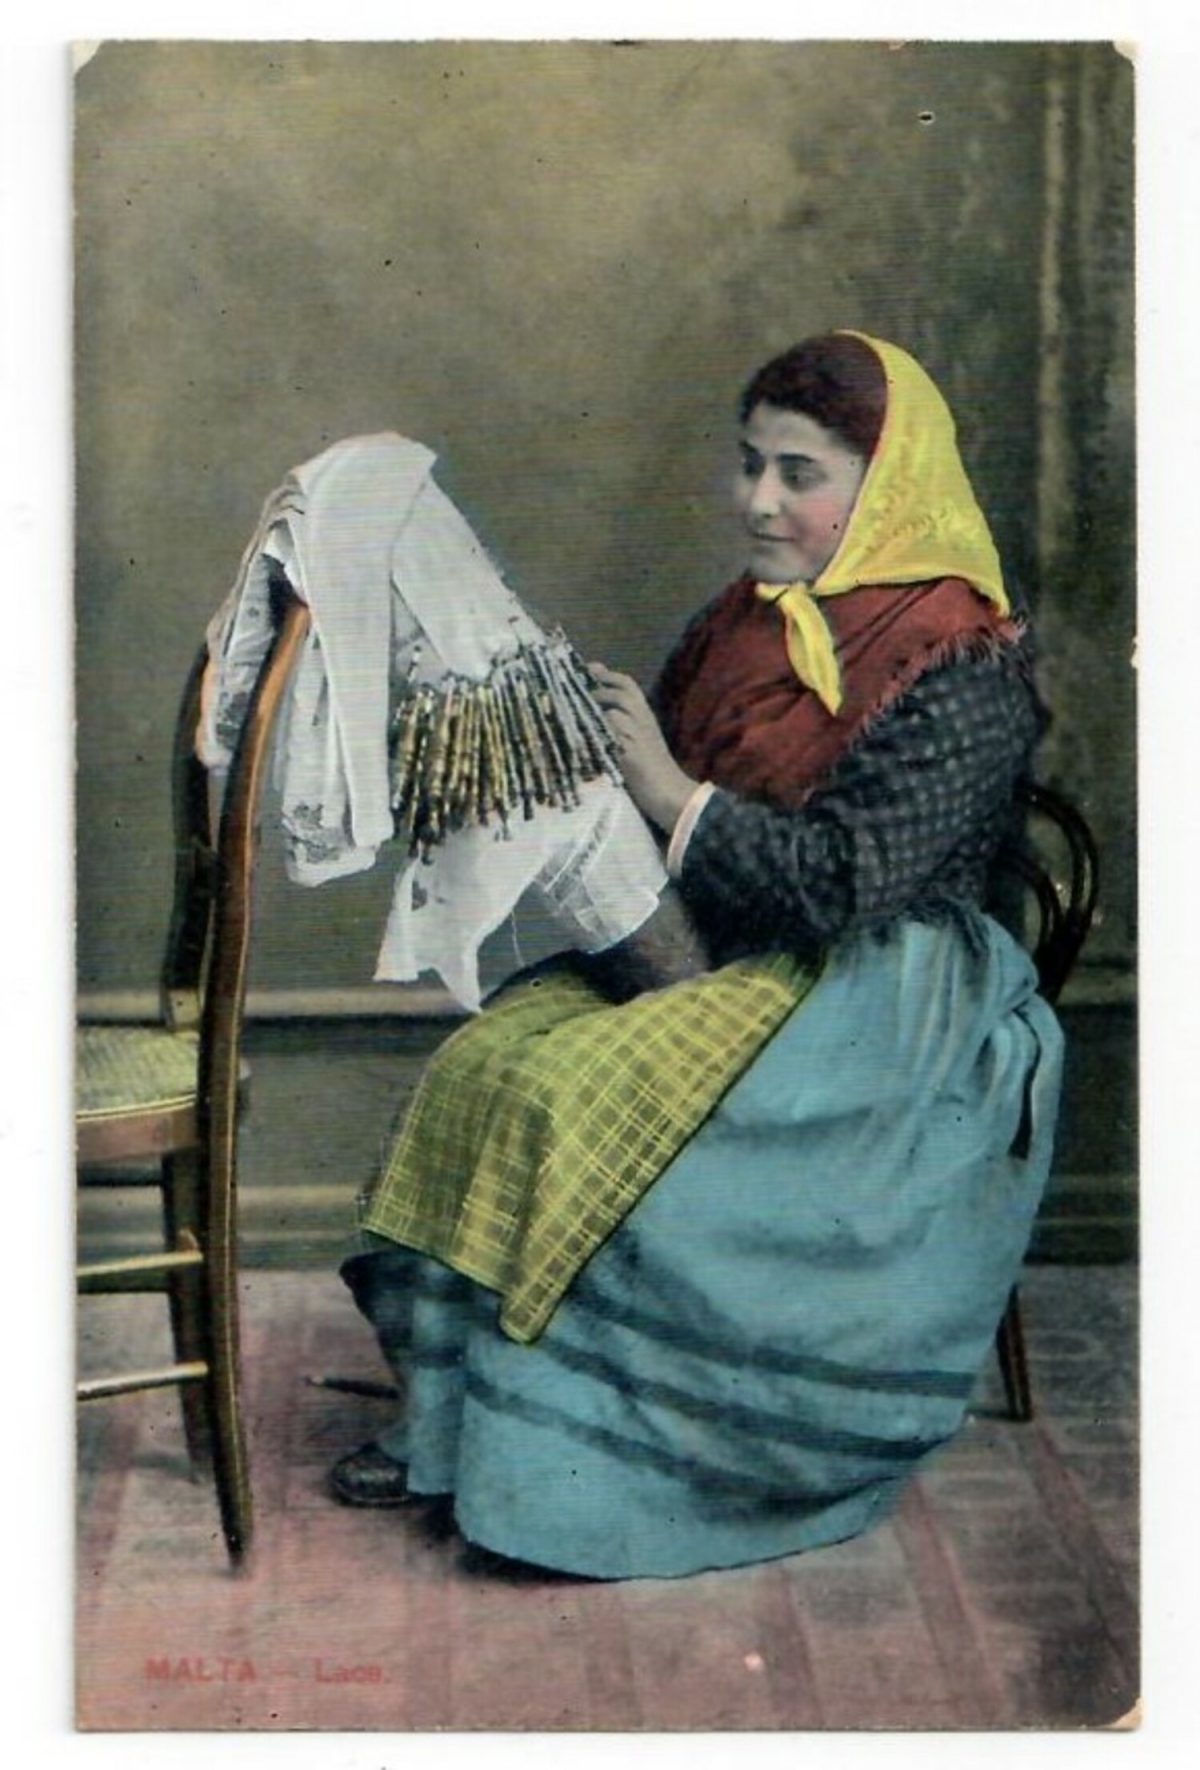 A Maltese lace maker at work using an upright pillow with numerous long, thin wooden bobbins (early 20th century).